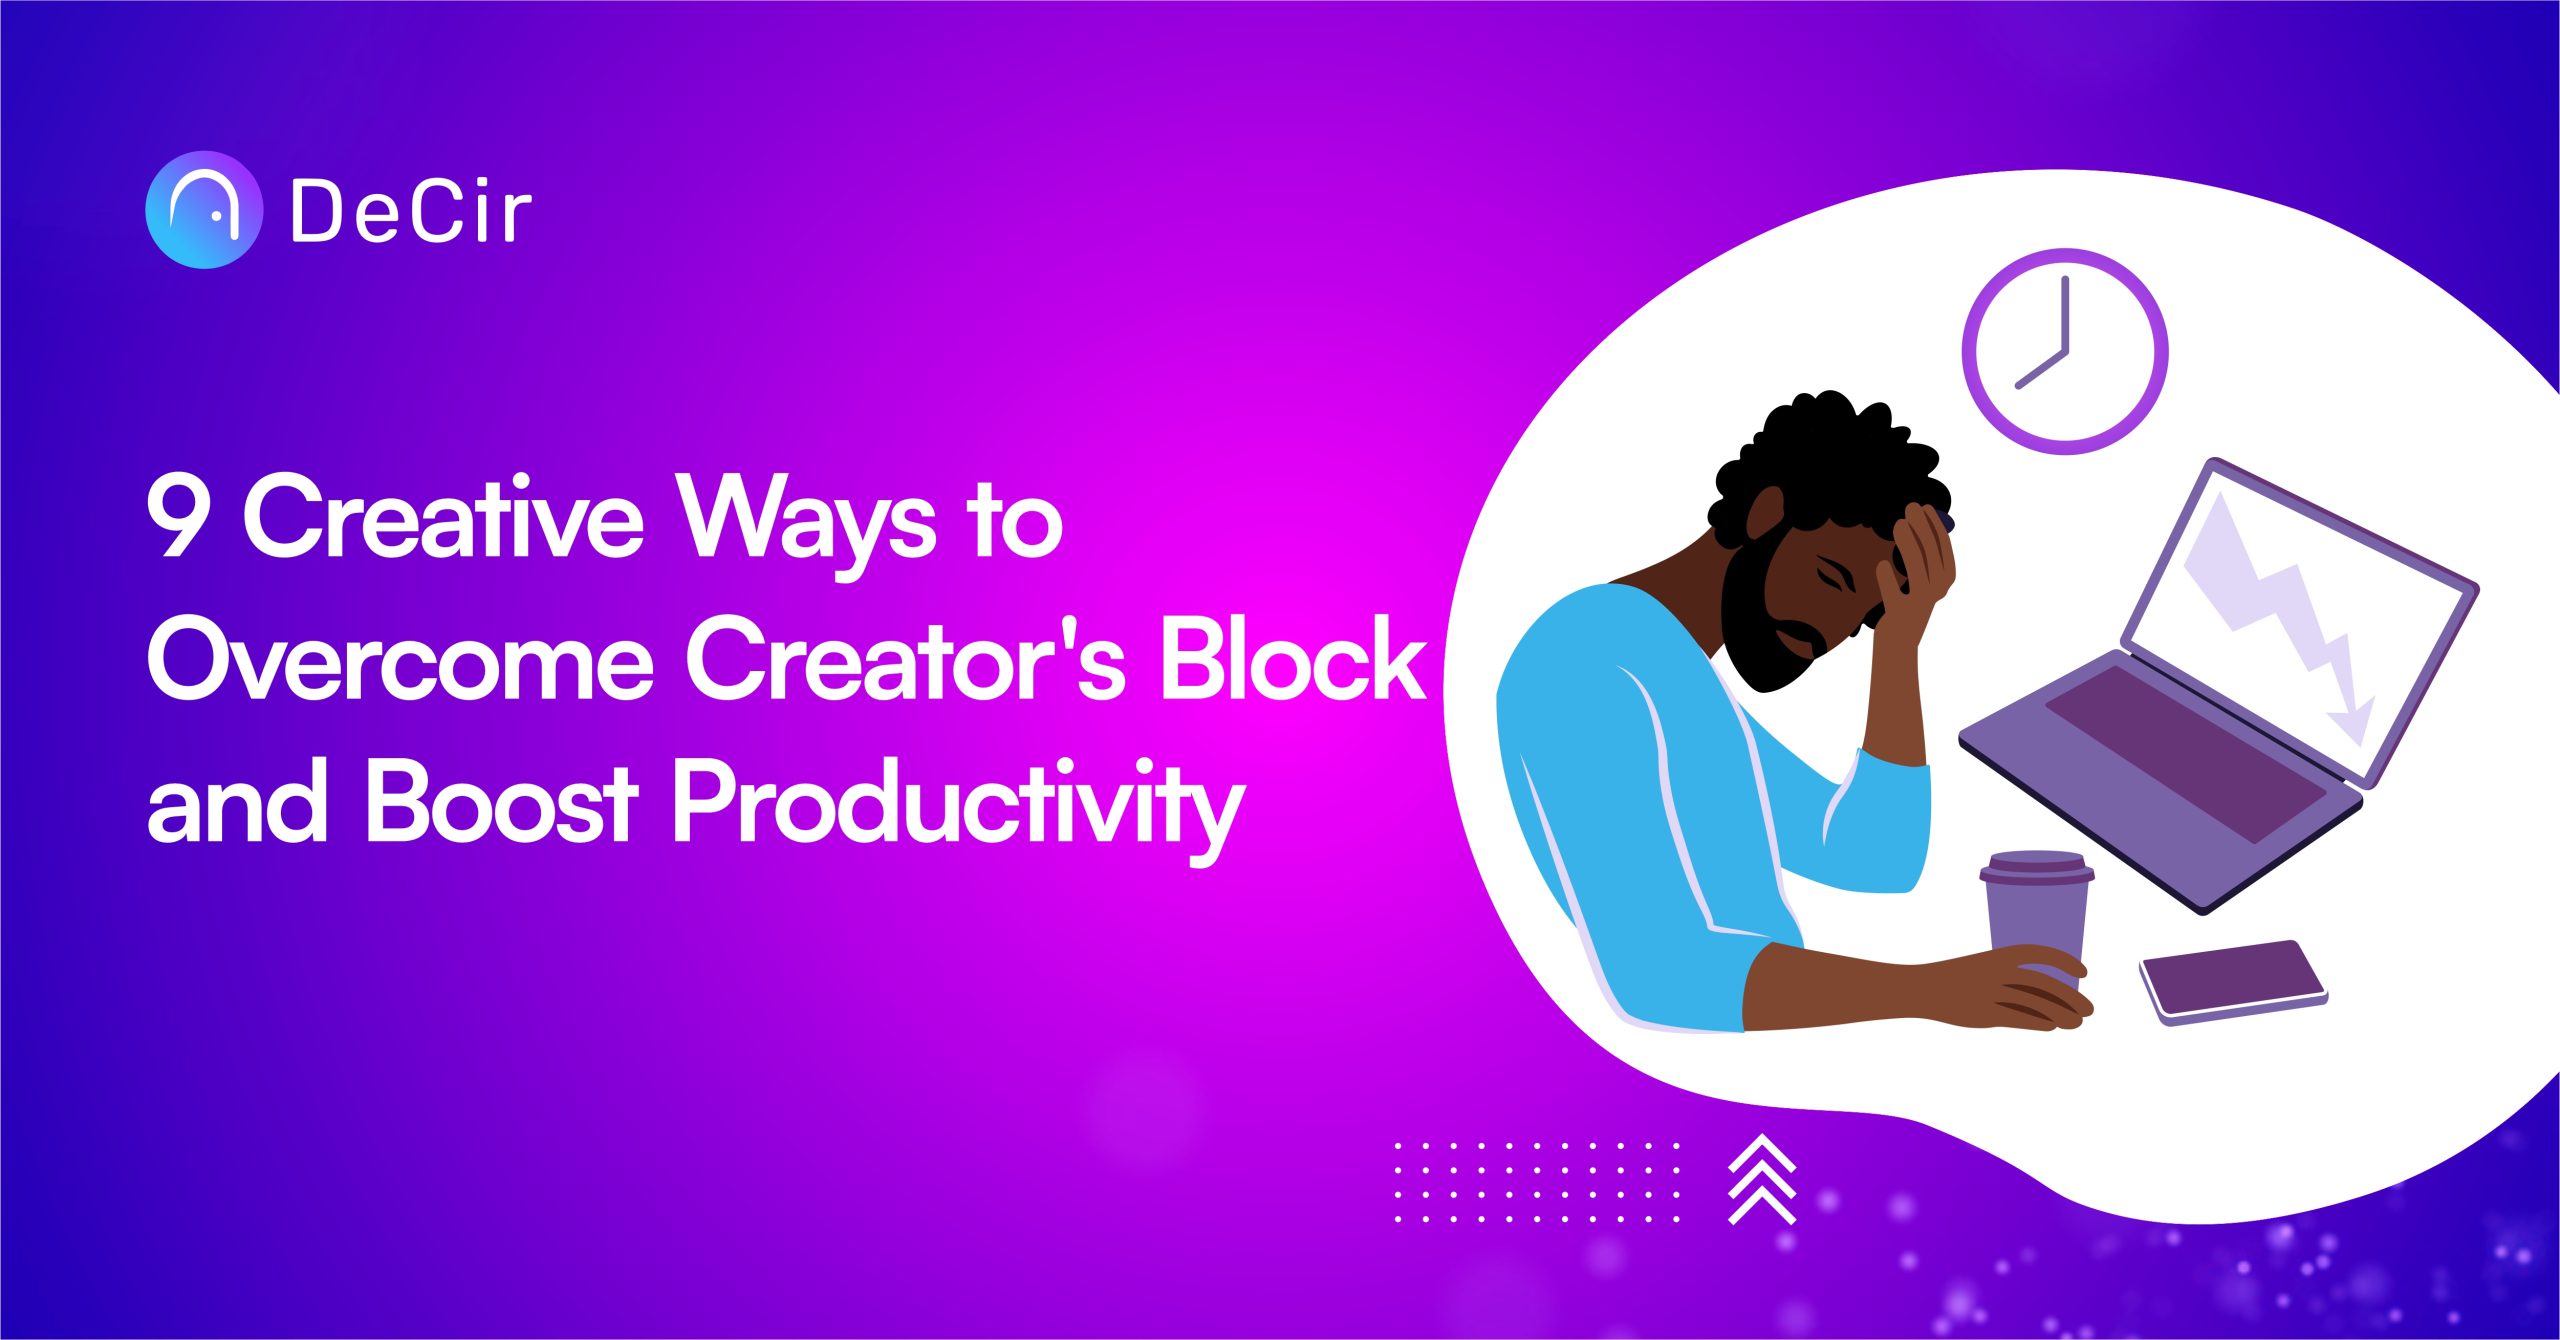 9 ways to overcome creator's block and boost productivity